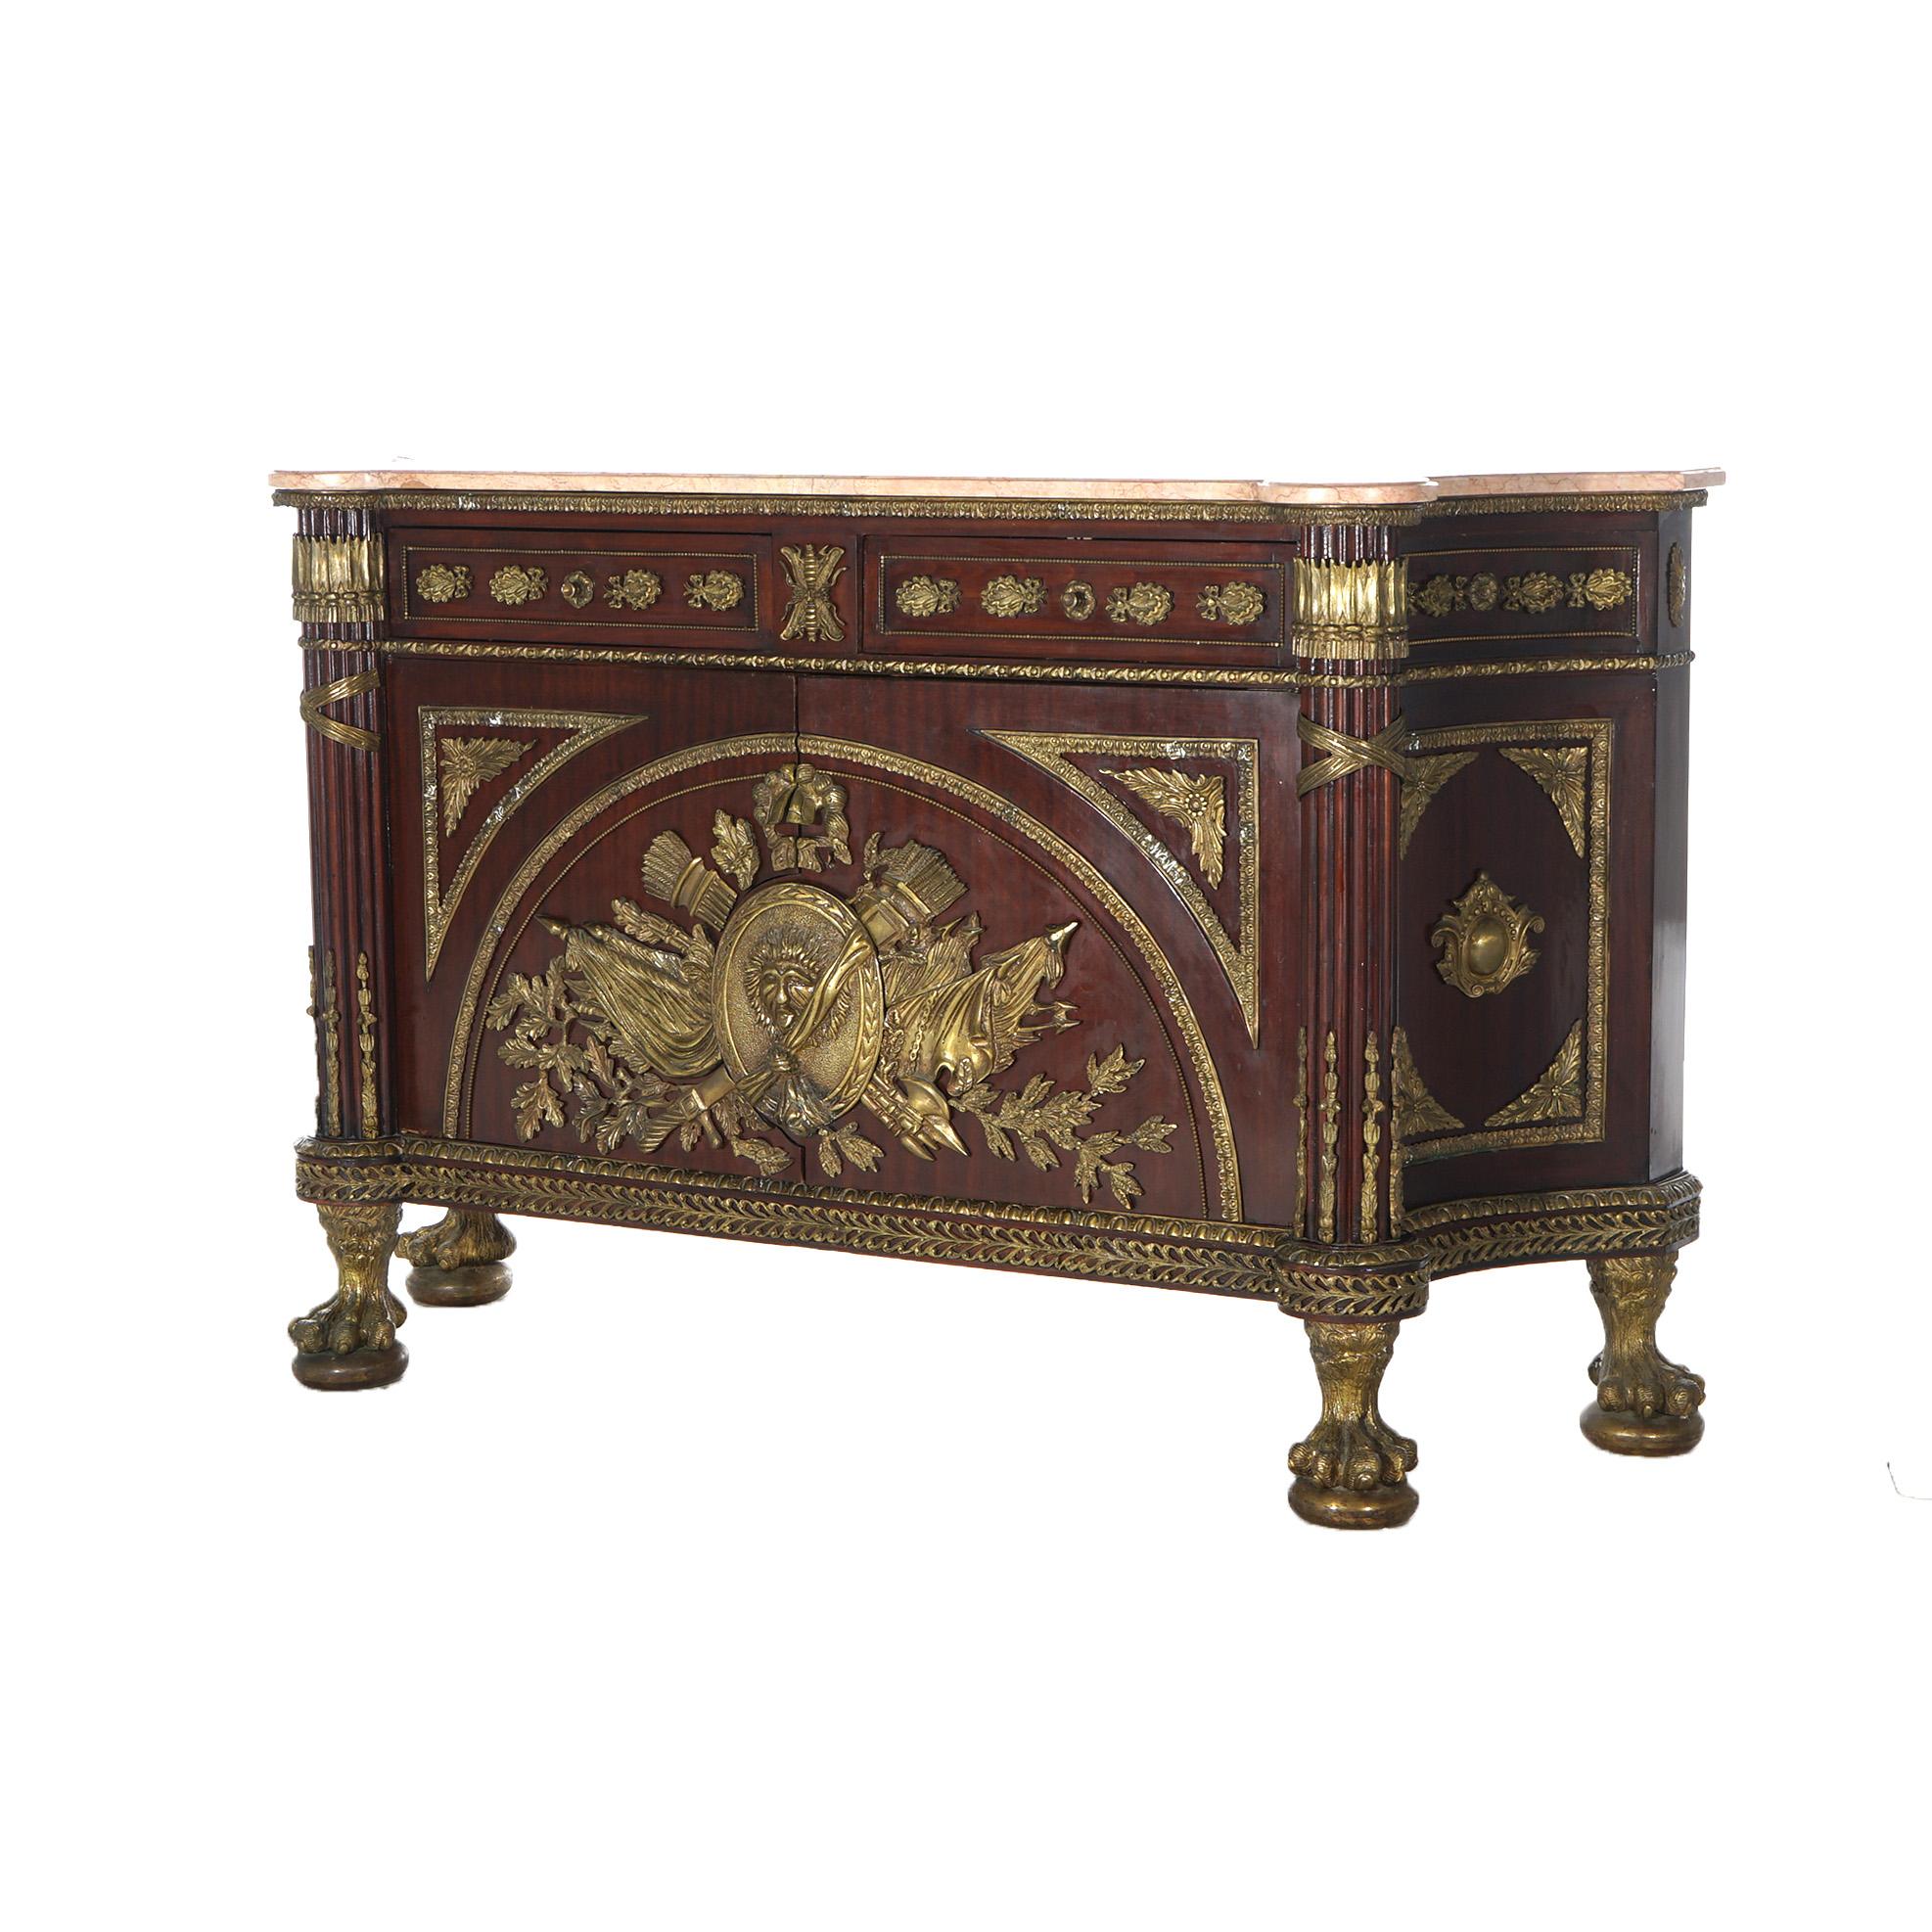 A French Empire style sideboard offers shaped and beveled marble top surmounting kingwood case having two drawers over double door lower cabinet, foliate cast ormolu mounts throughout, raised on oversized paw feet, 20th century

Measures - 38.5